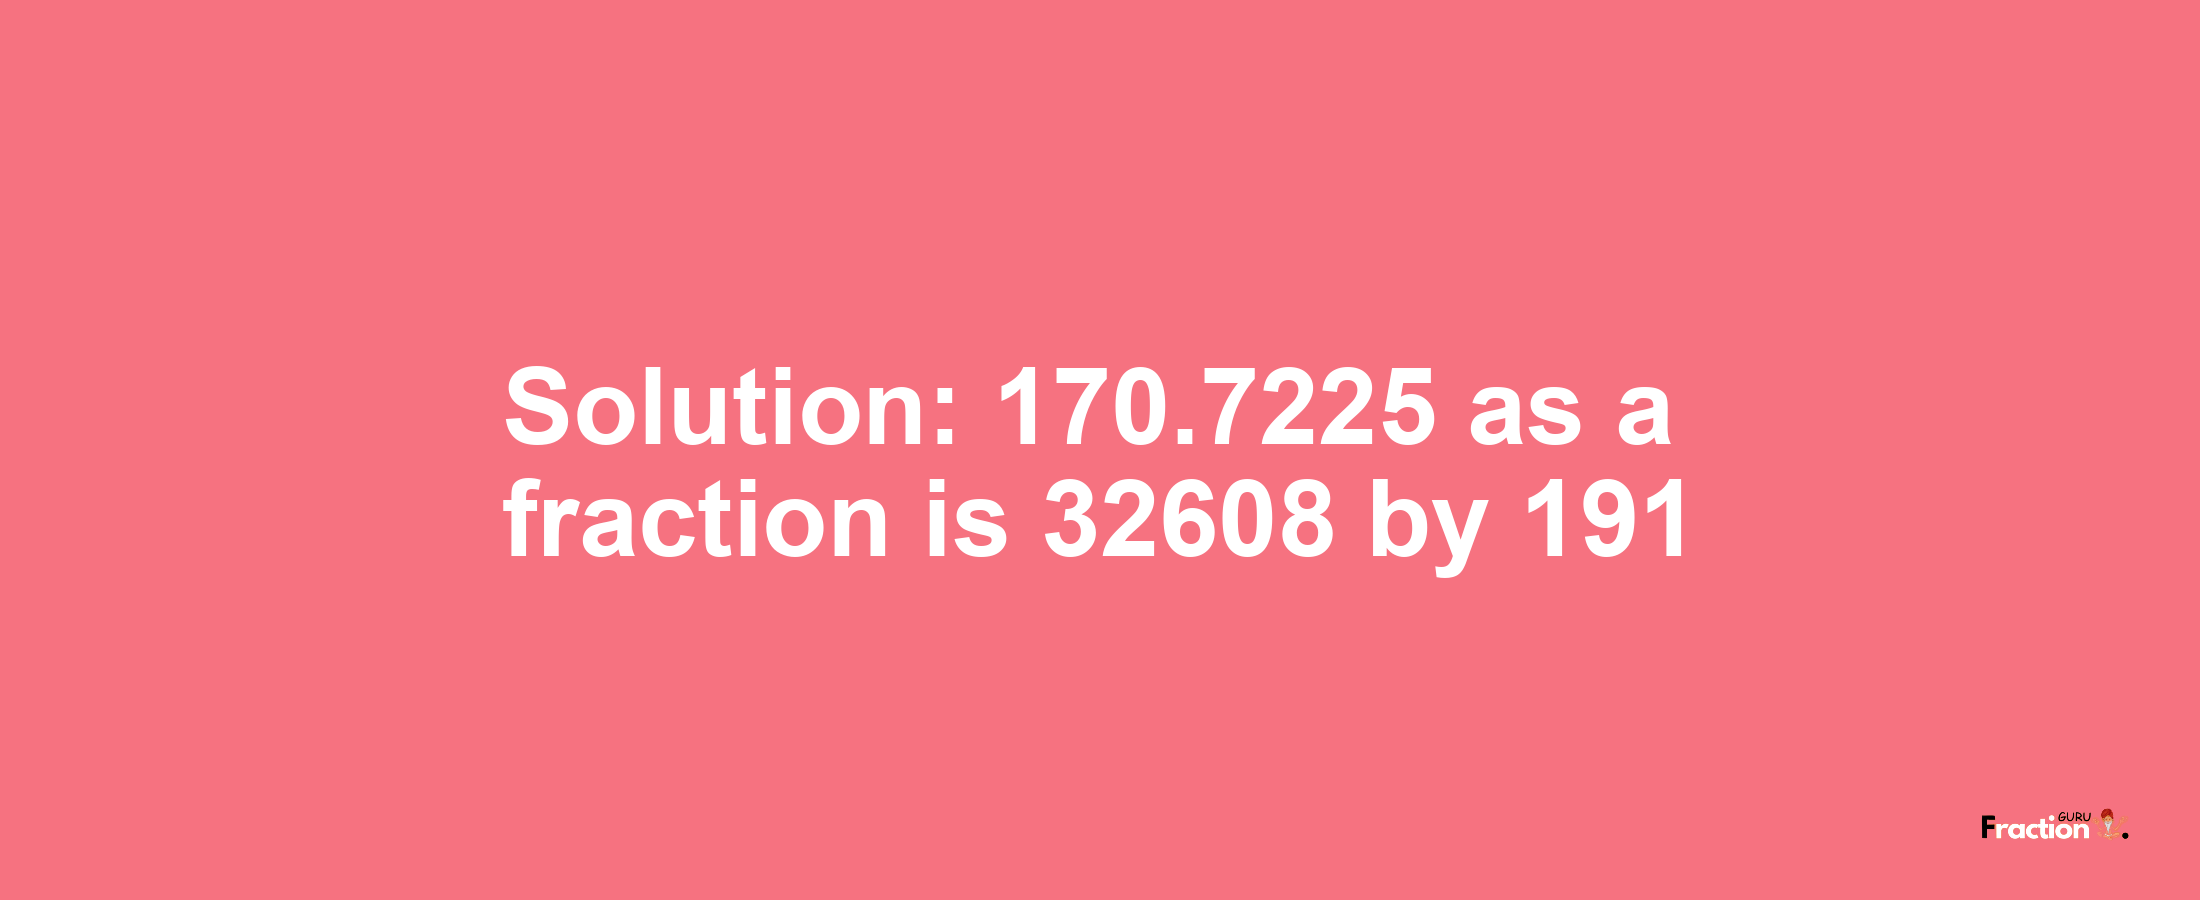 Solution:170.7225 as a fraction is 32608/191